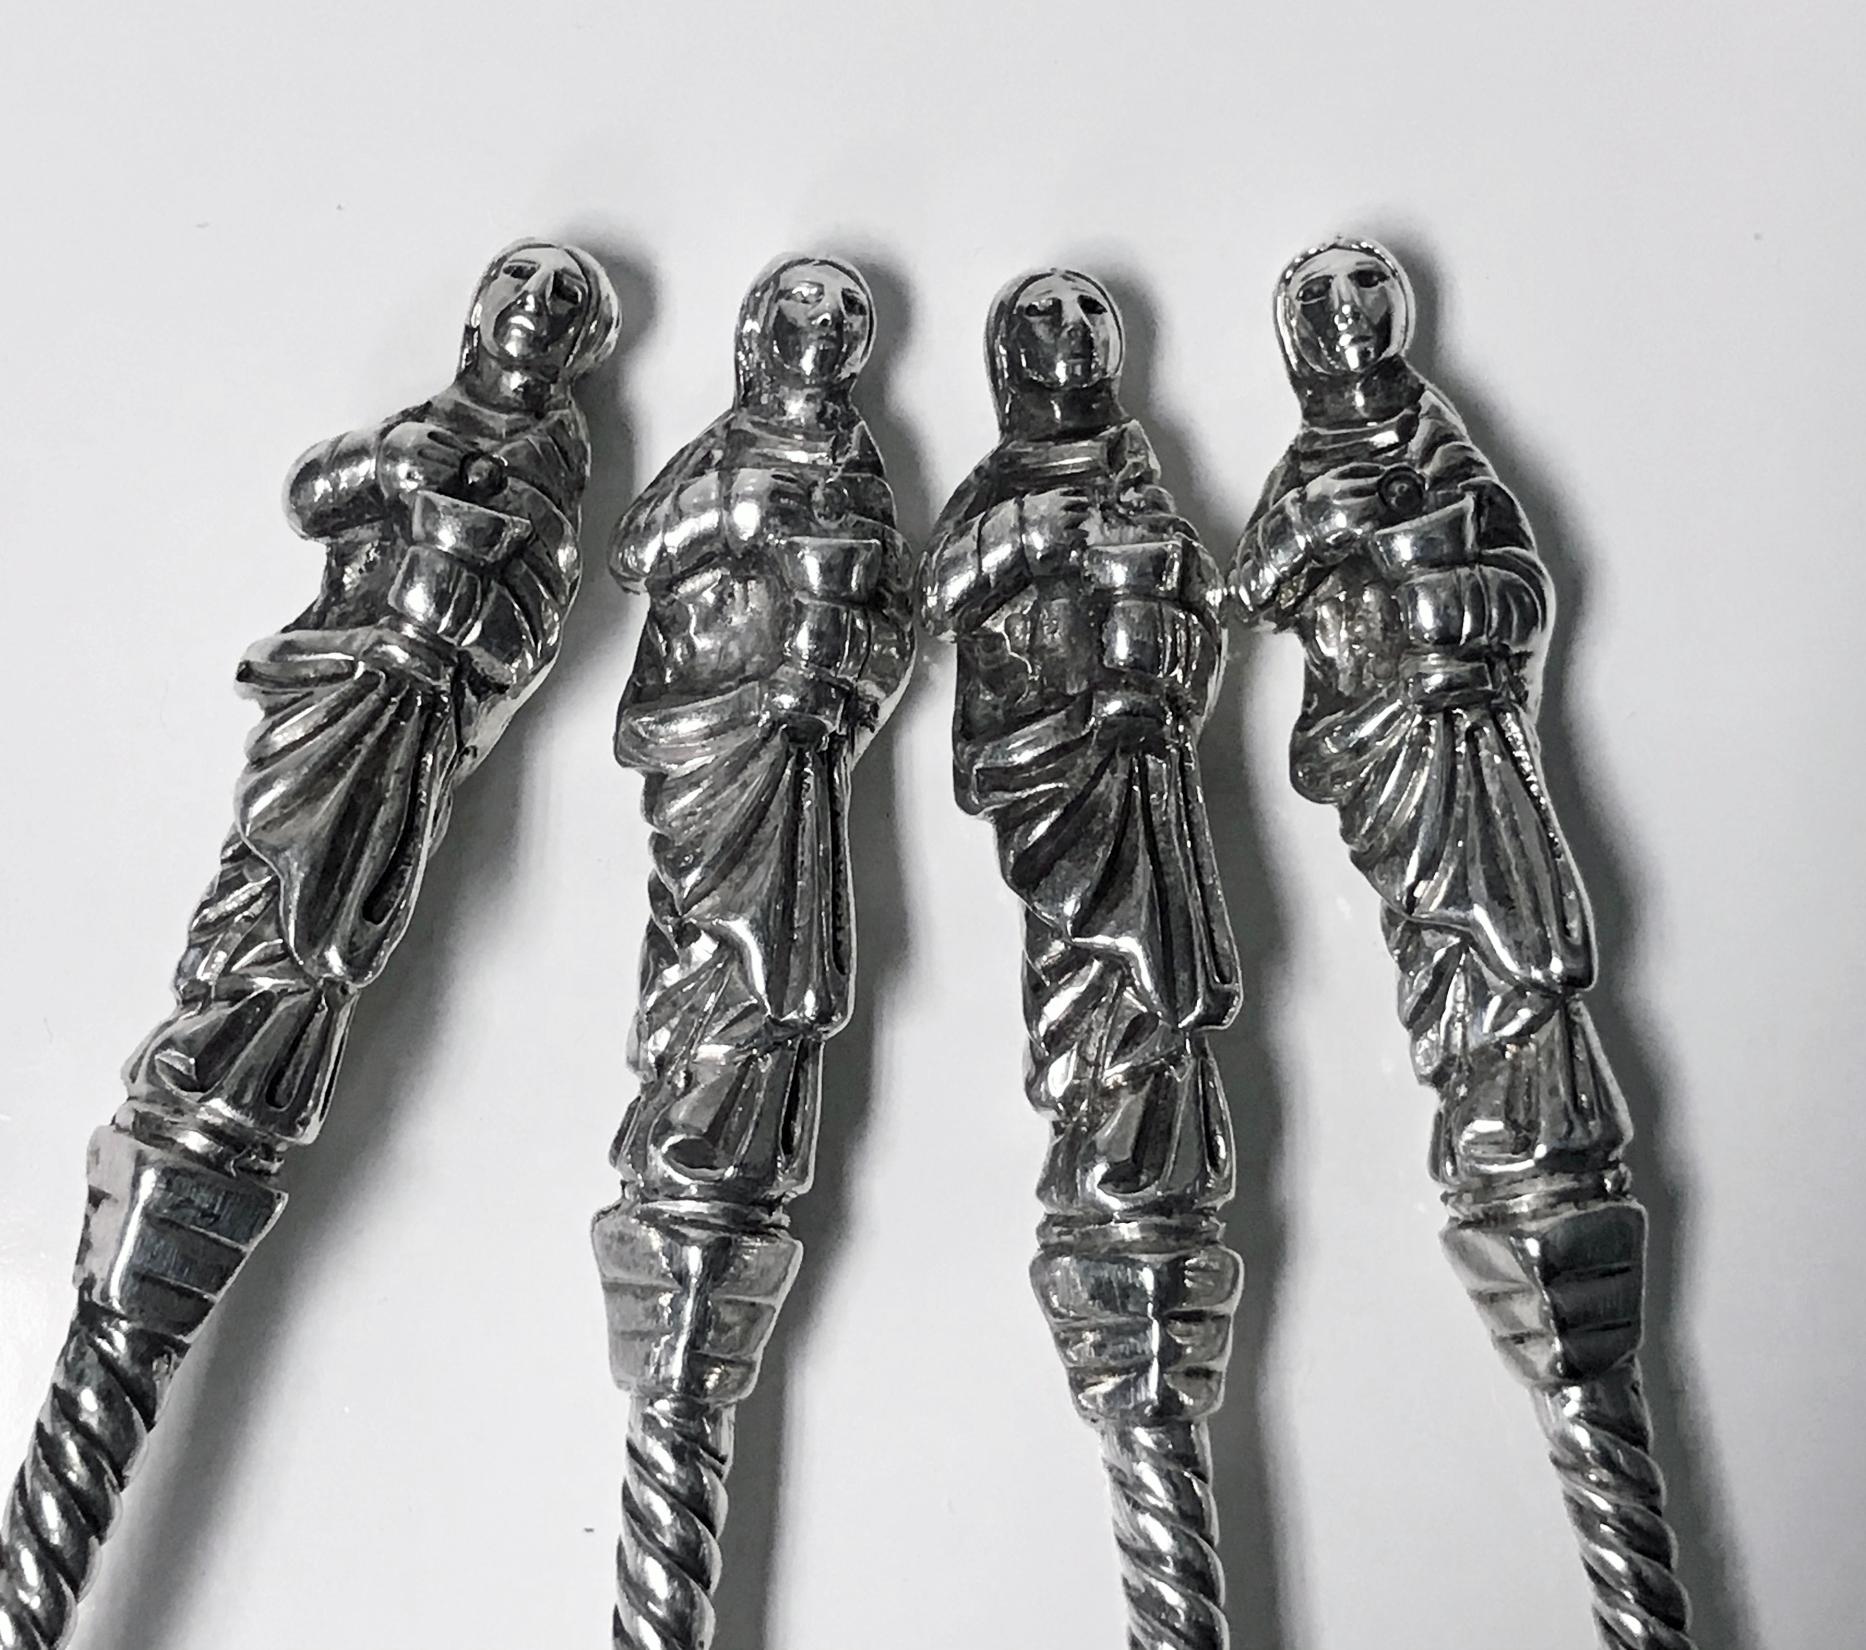 Set of four Victorian silver apostle spoons Edward Hutton London 1888. Each with fluted scallop shell bowls and part-twist stems, each with St. John finials. Lengths: 8.25 inches. Total weight: 277 grams.